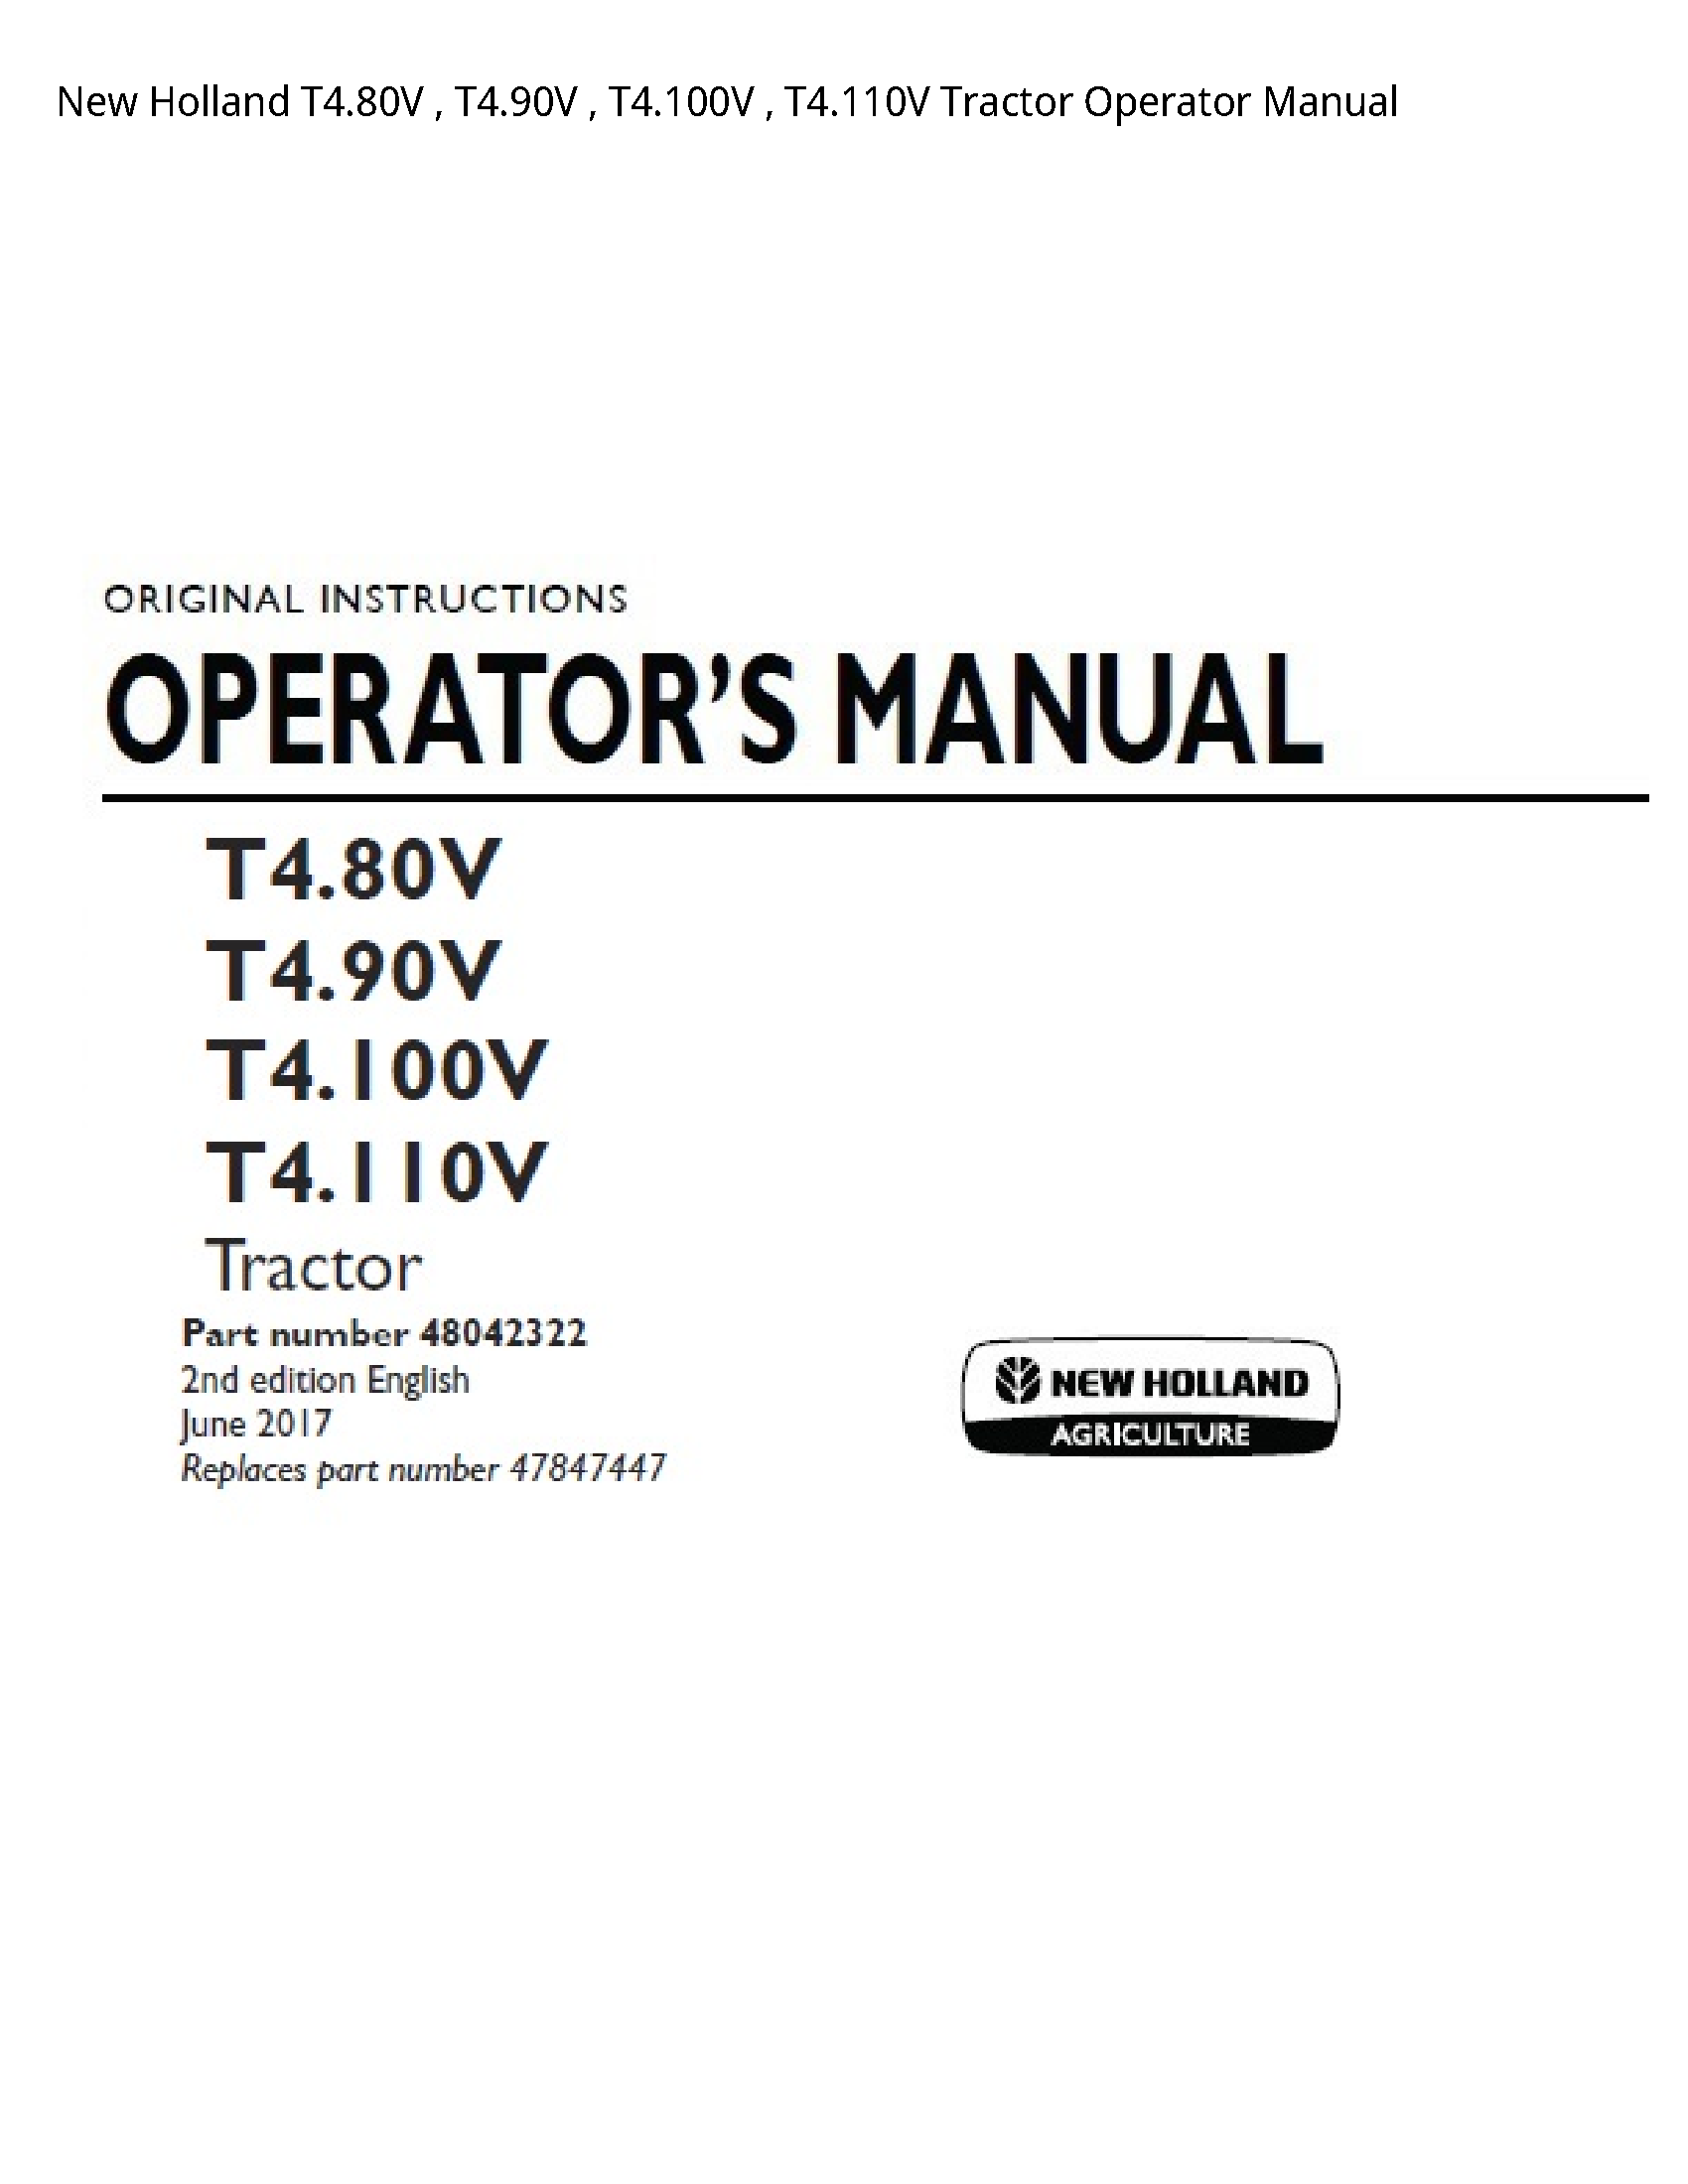 New Holland T4.80V Tractor Operator manual